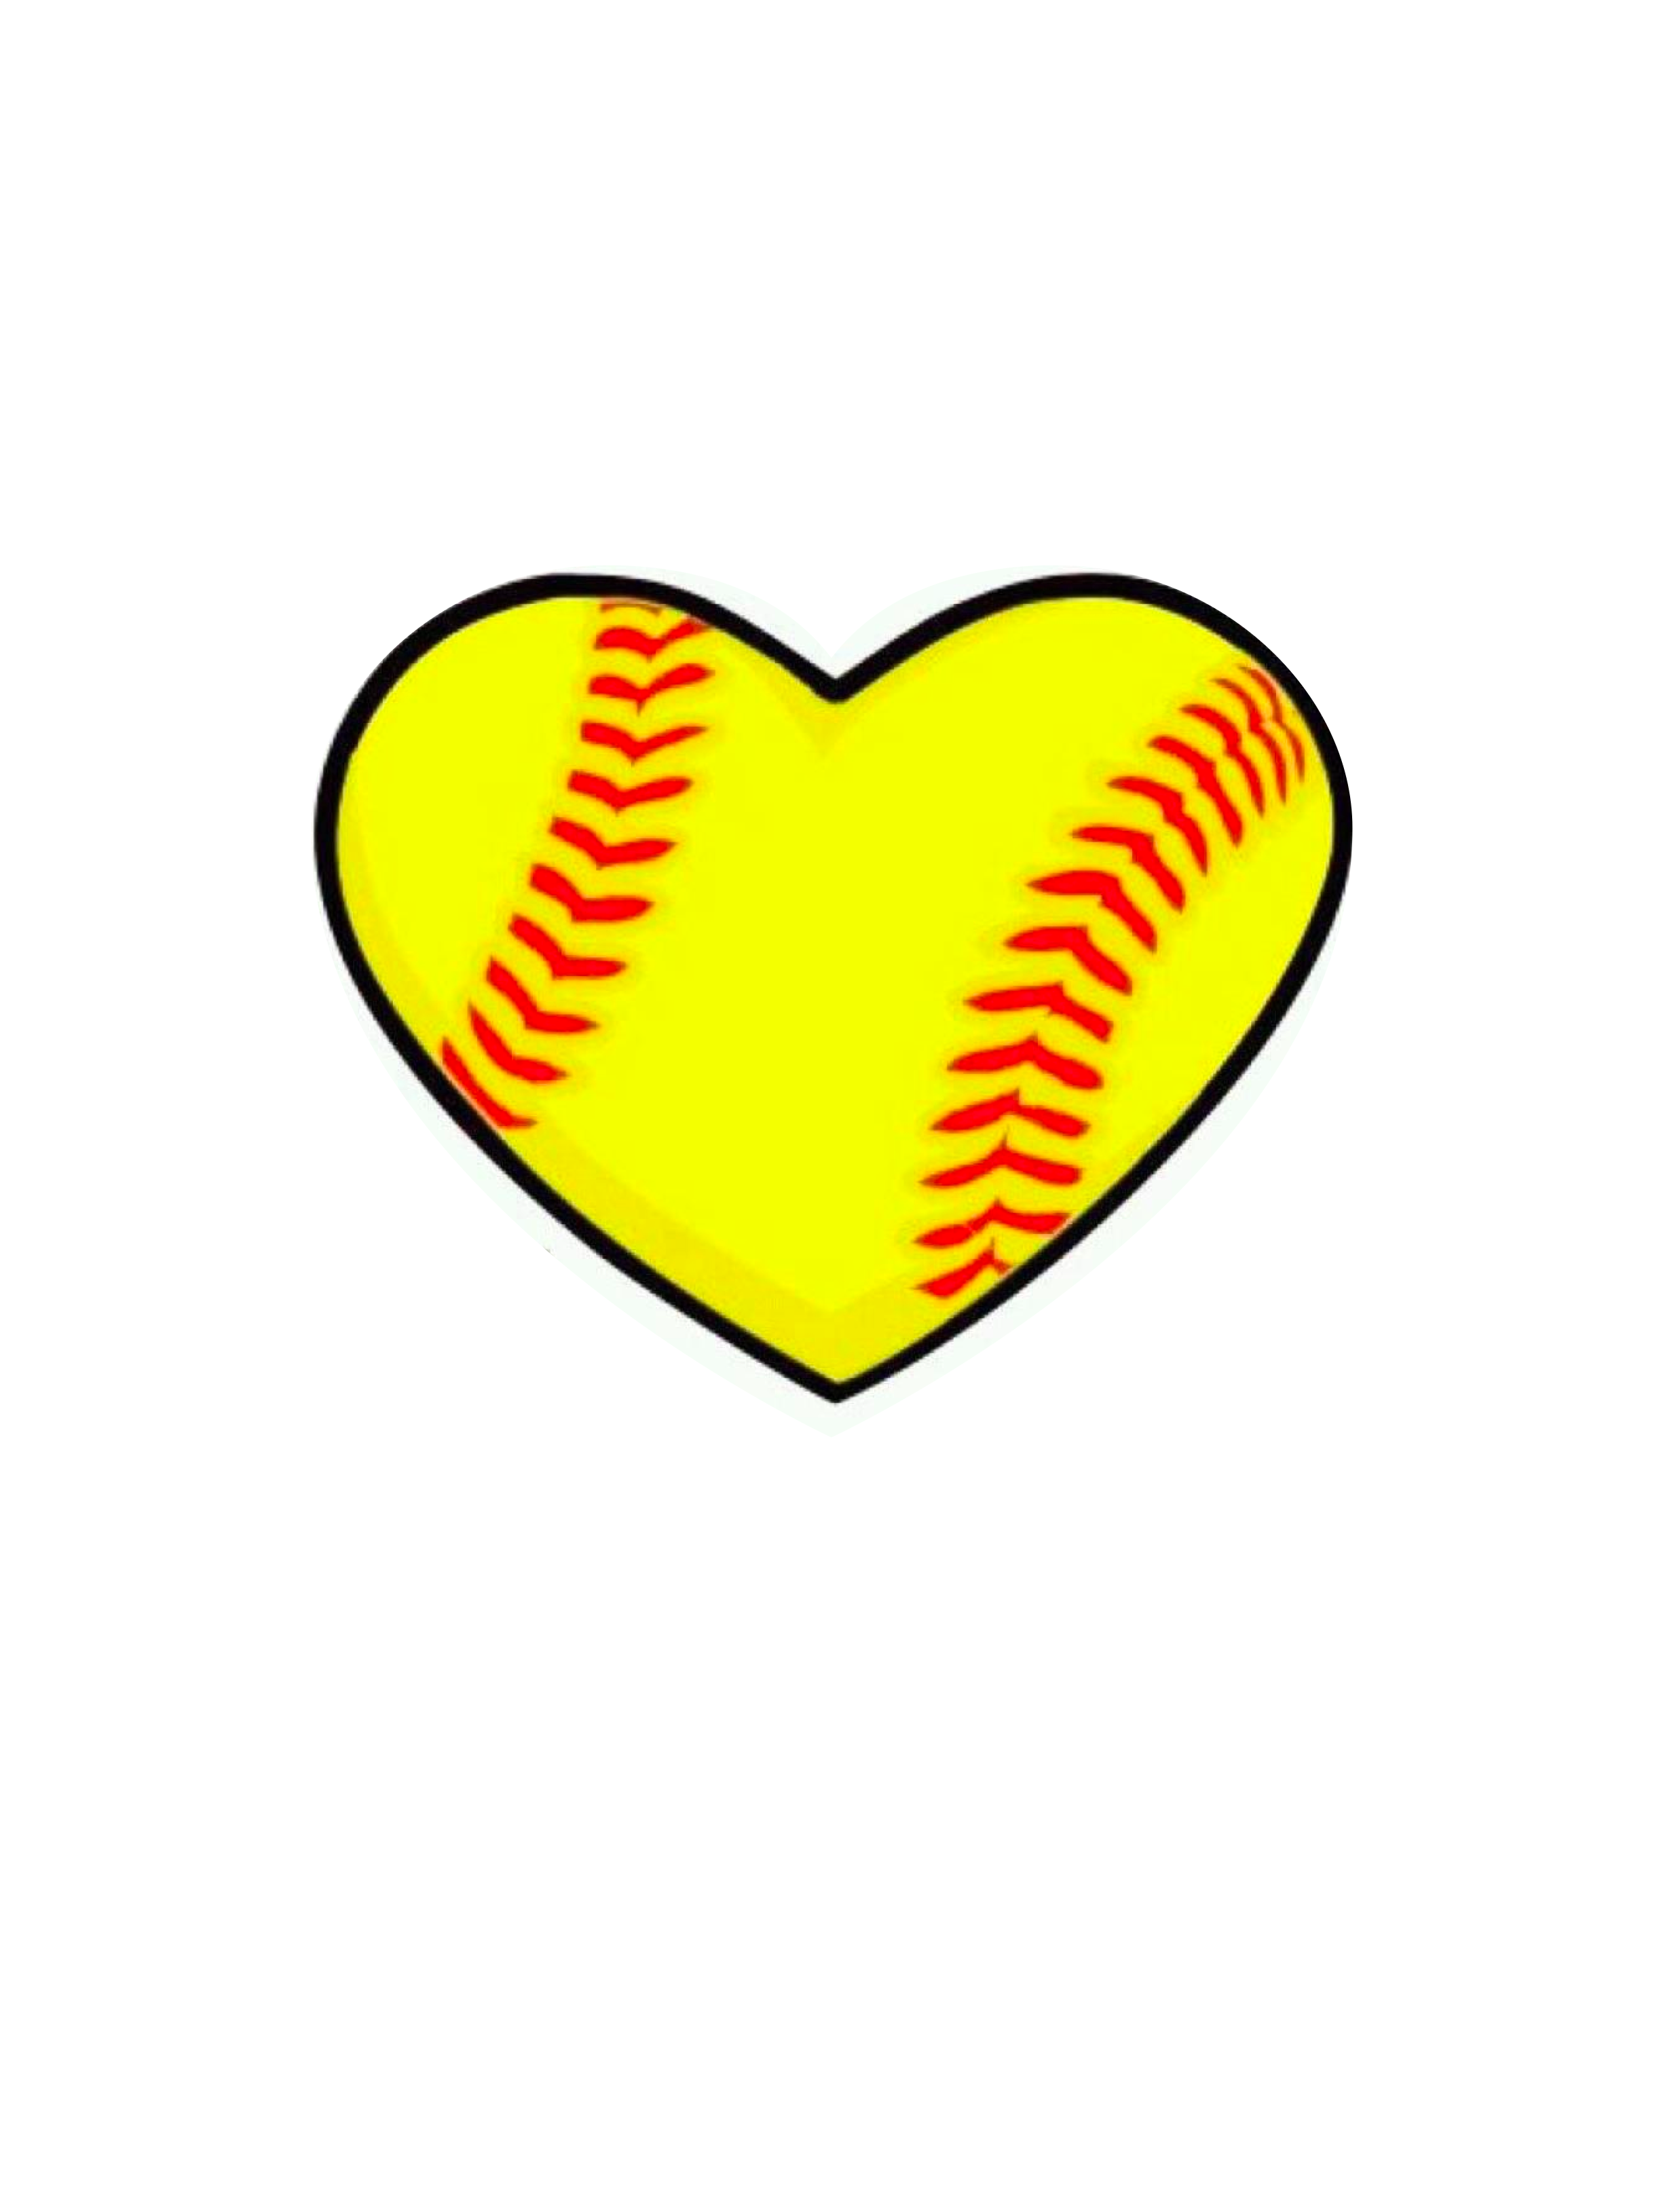 Softball clipart images